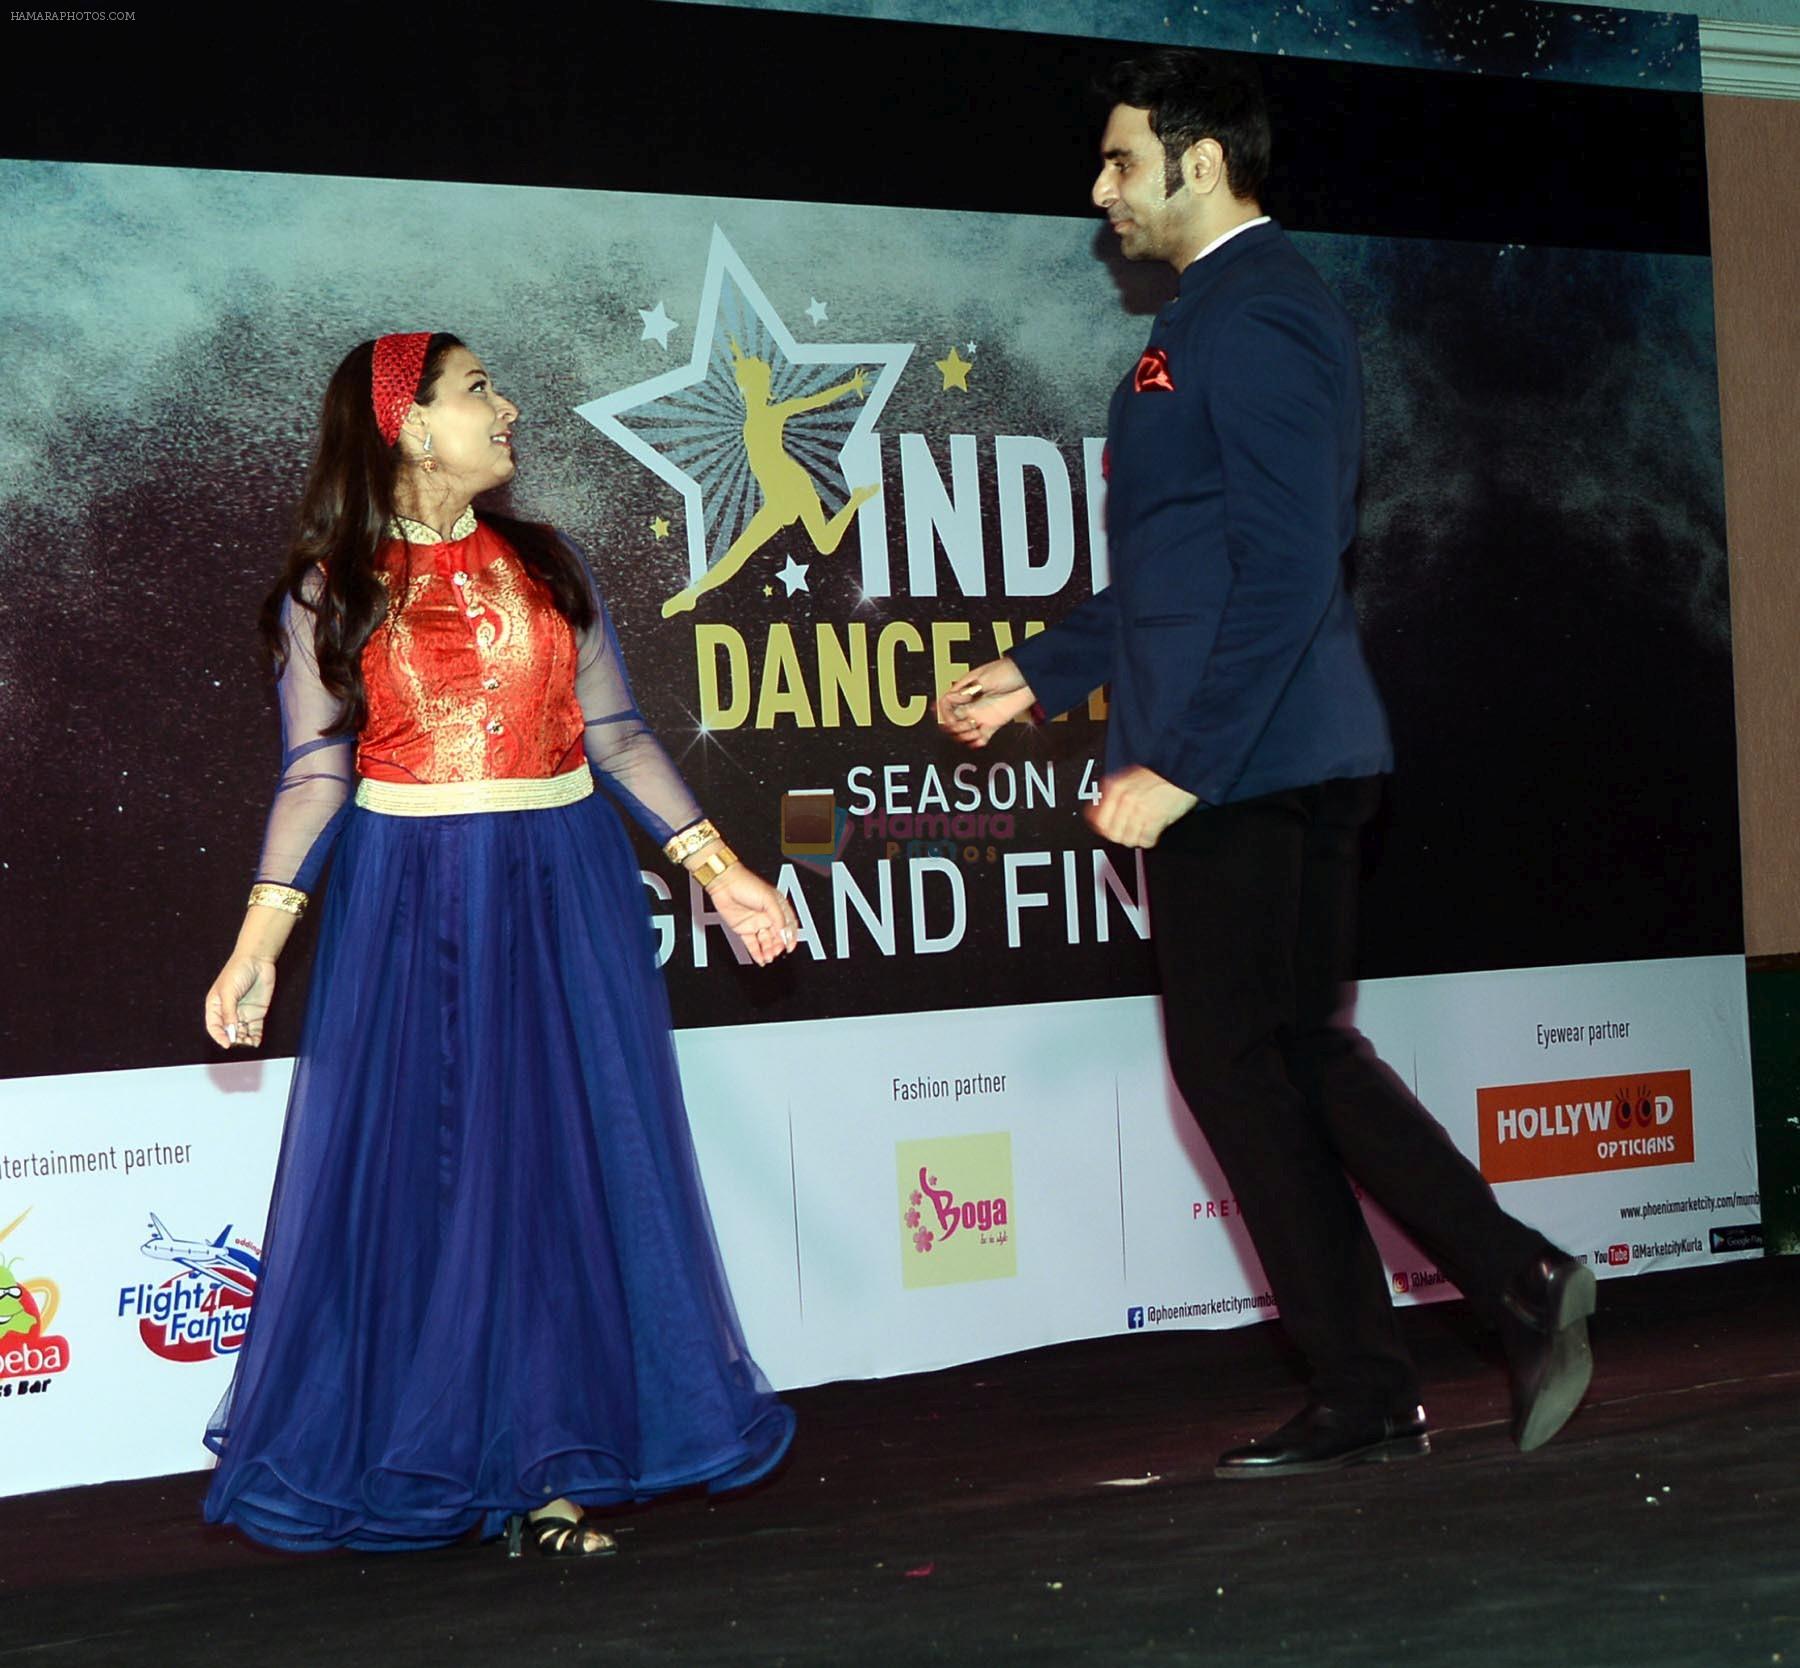 Sharbani Mukherjee at the 4th edition of India Dance Week hosted by Sandip Soparrkar